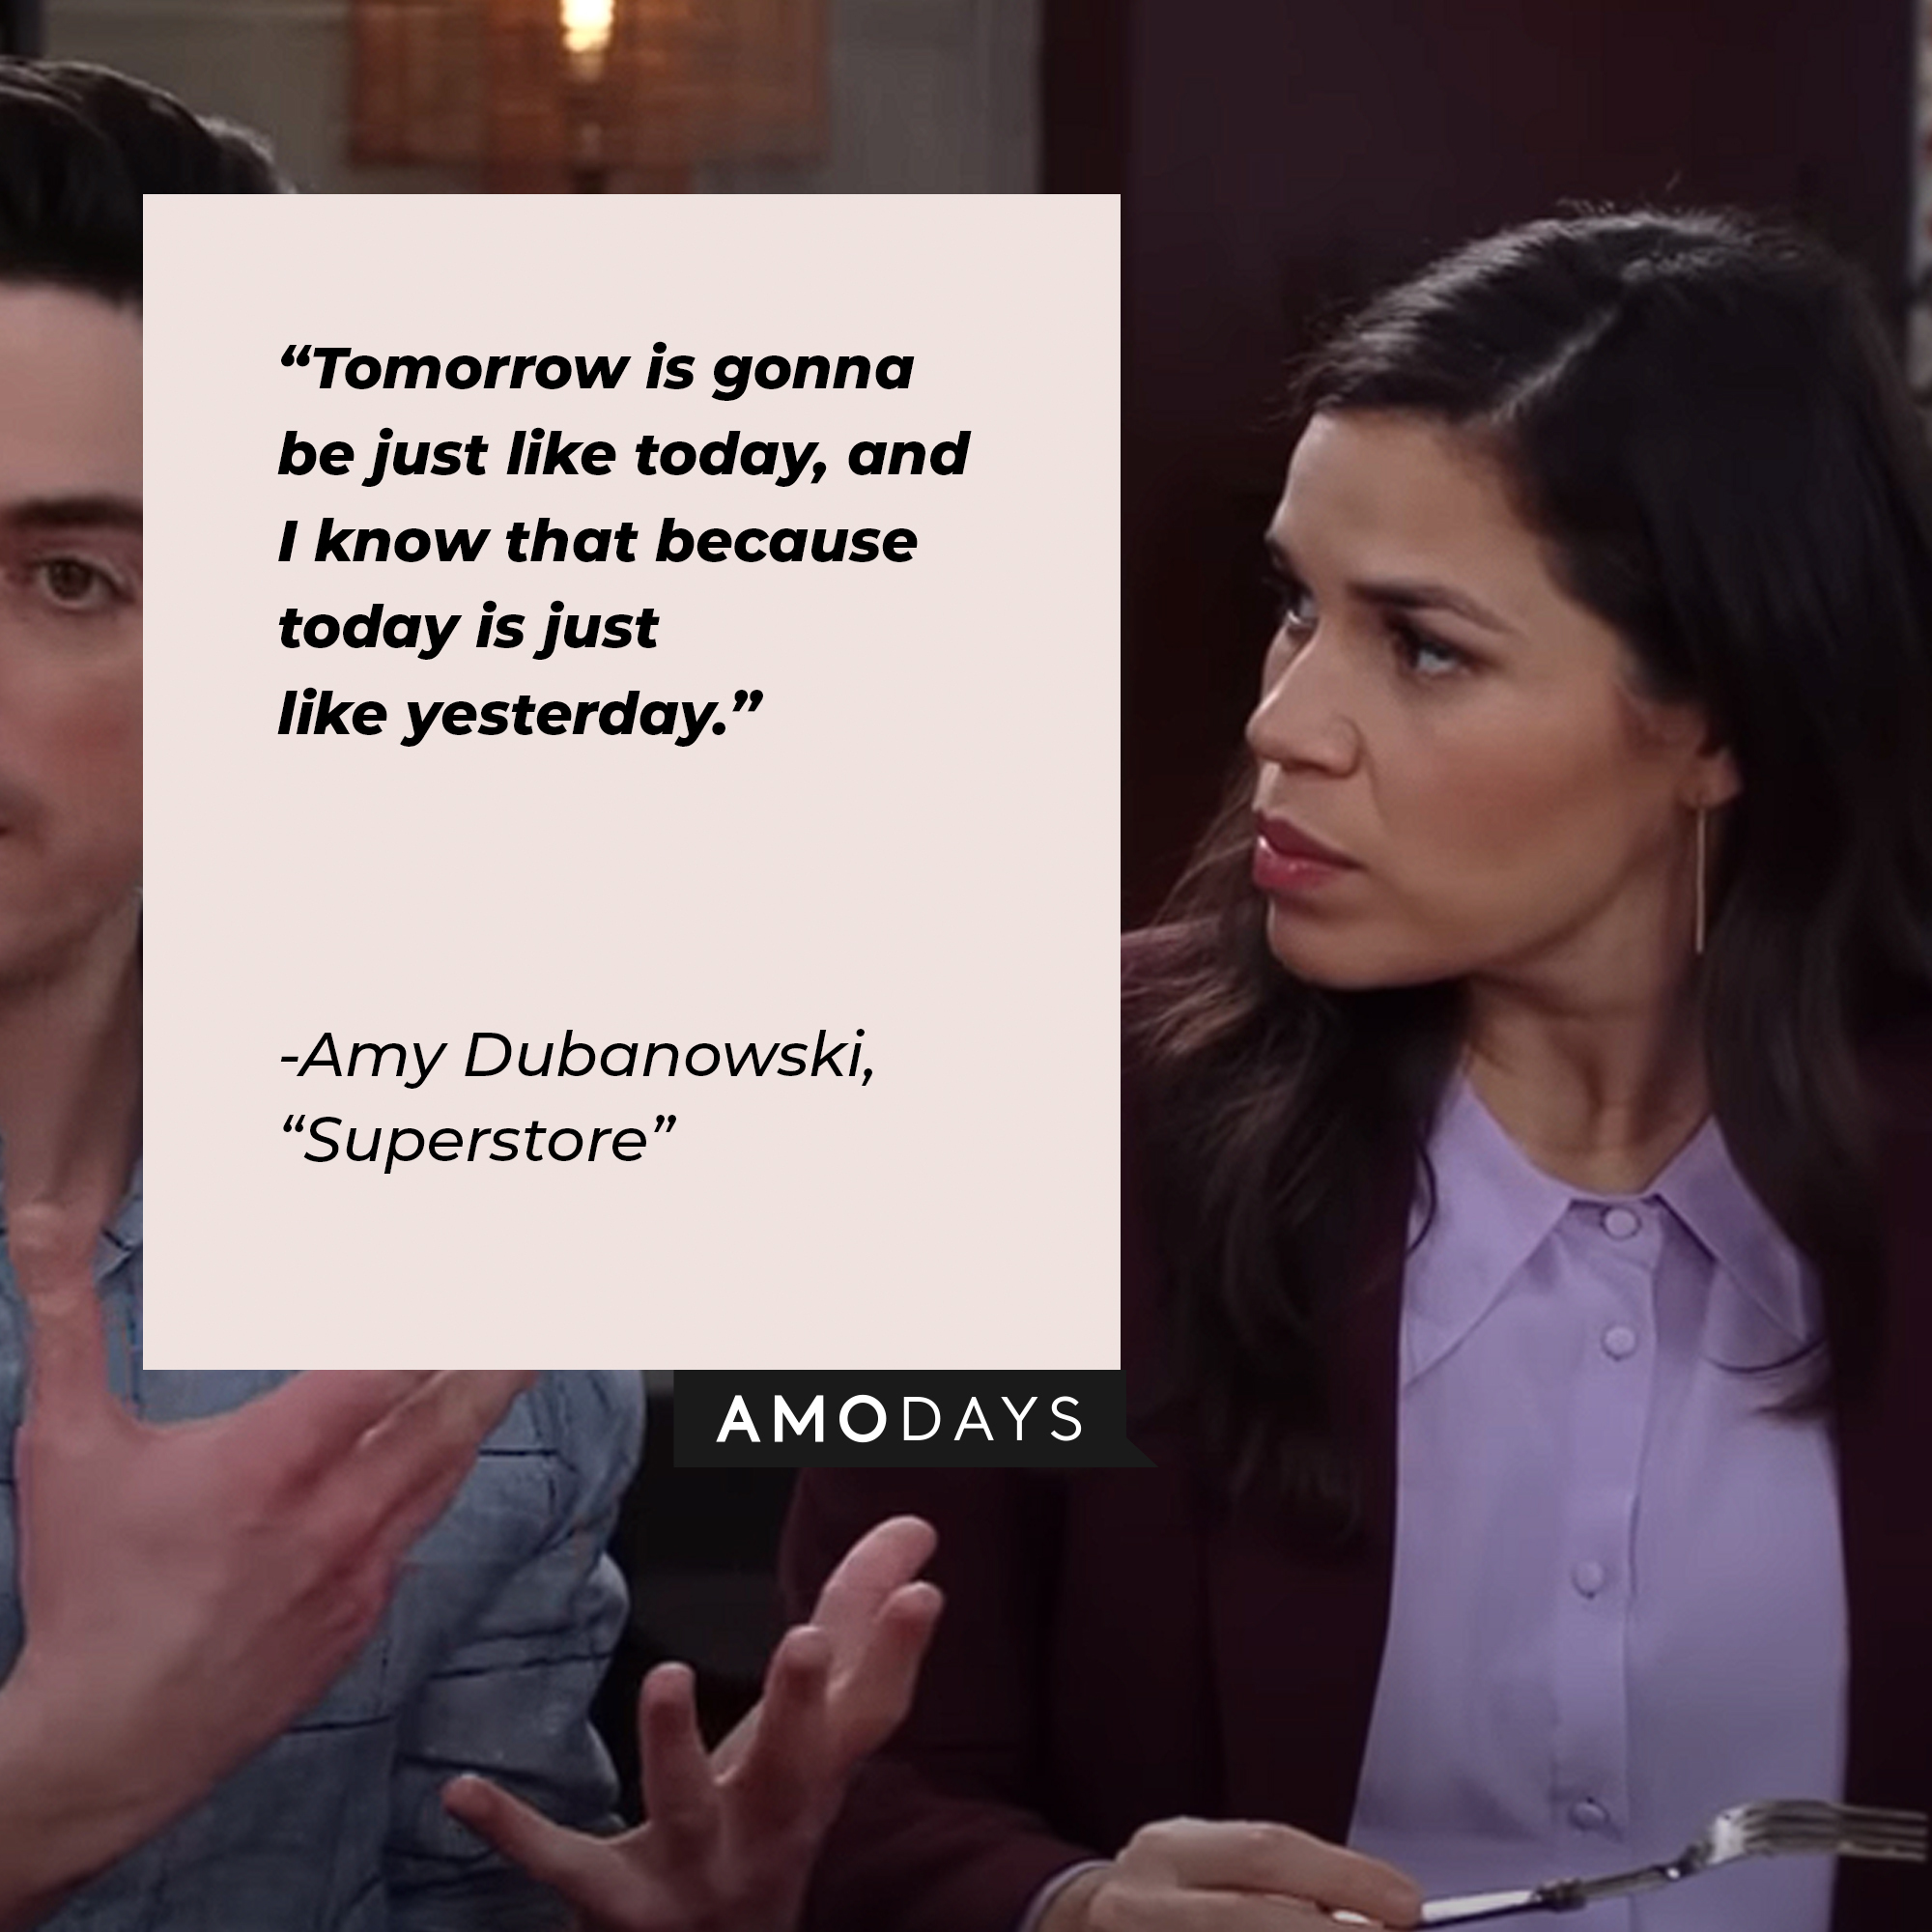 Image of Amy Dubanowski with the quote: “Tomorrow is gonna be just like today, and I know that because today is just like yesterday.” | Source: Youtube.com/NBCSuperstore